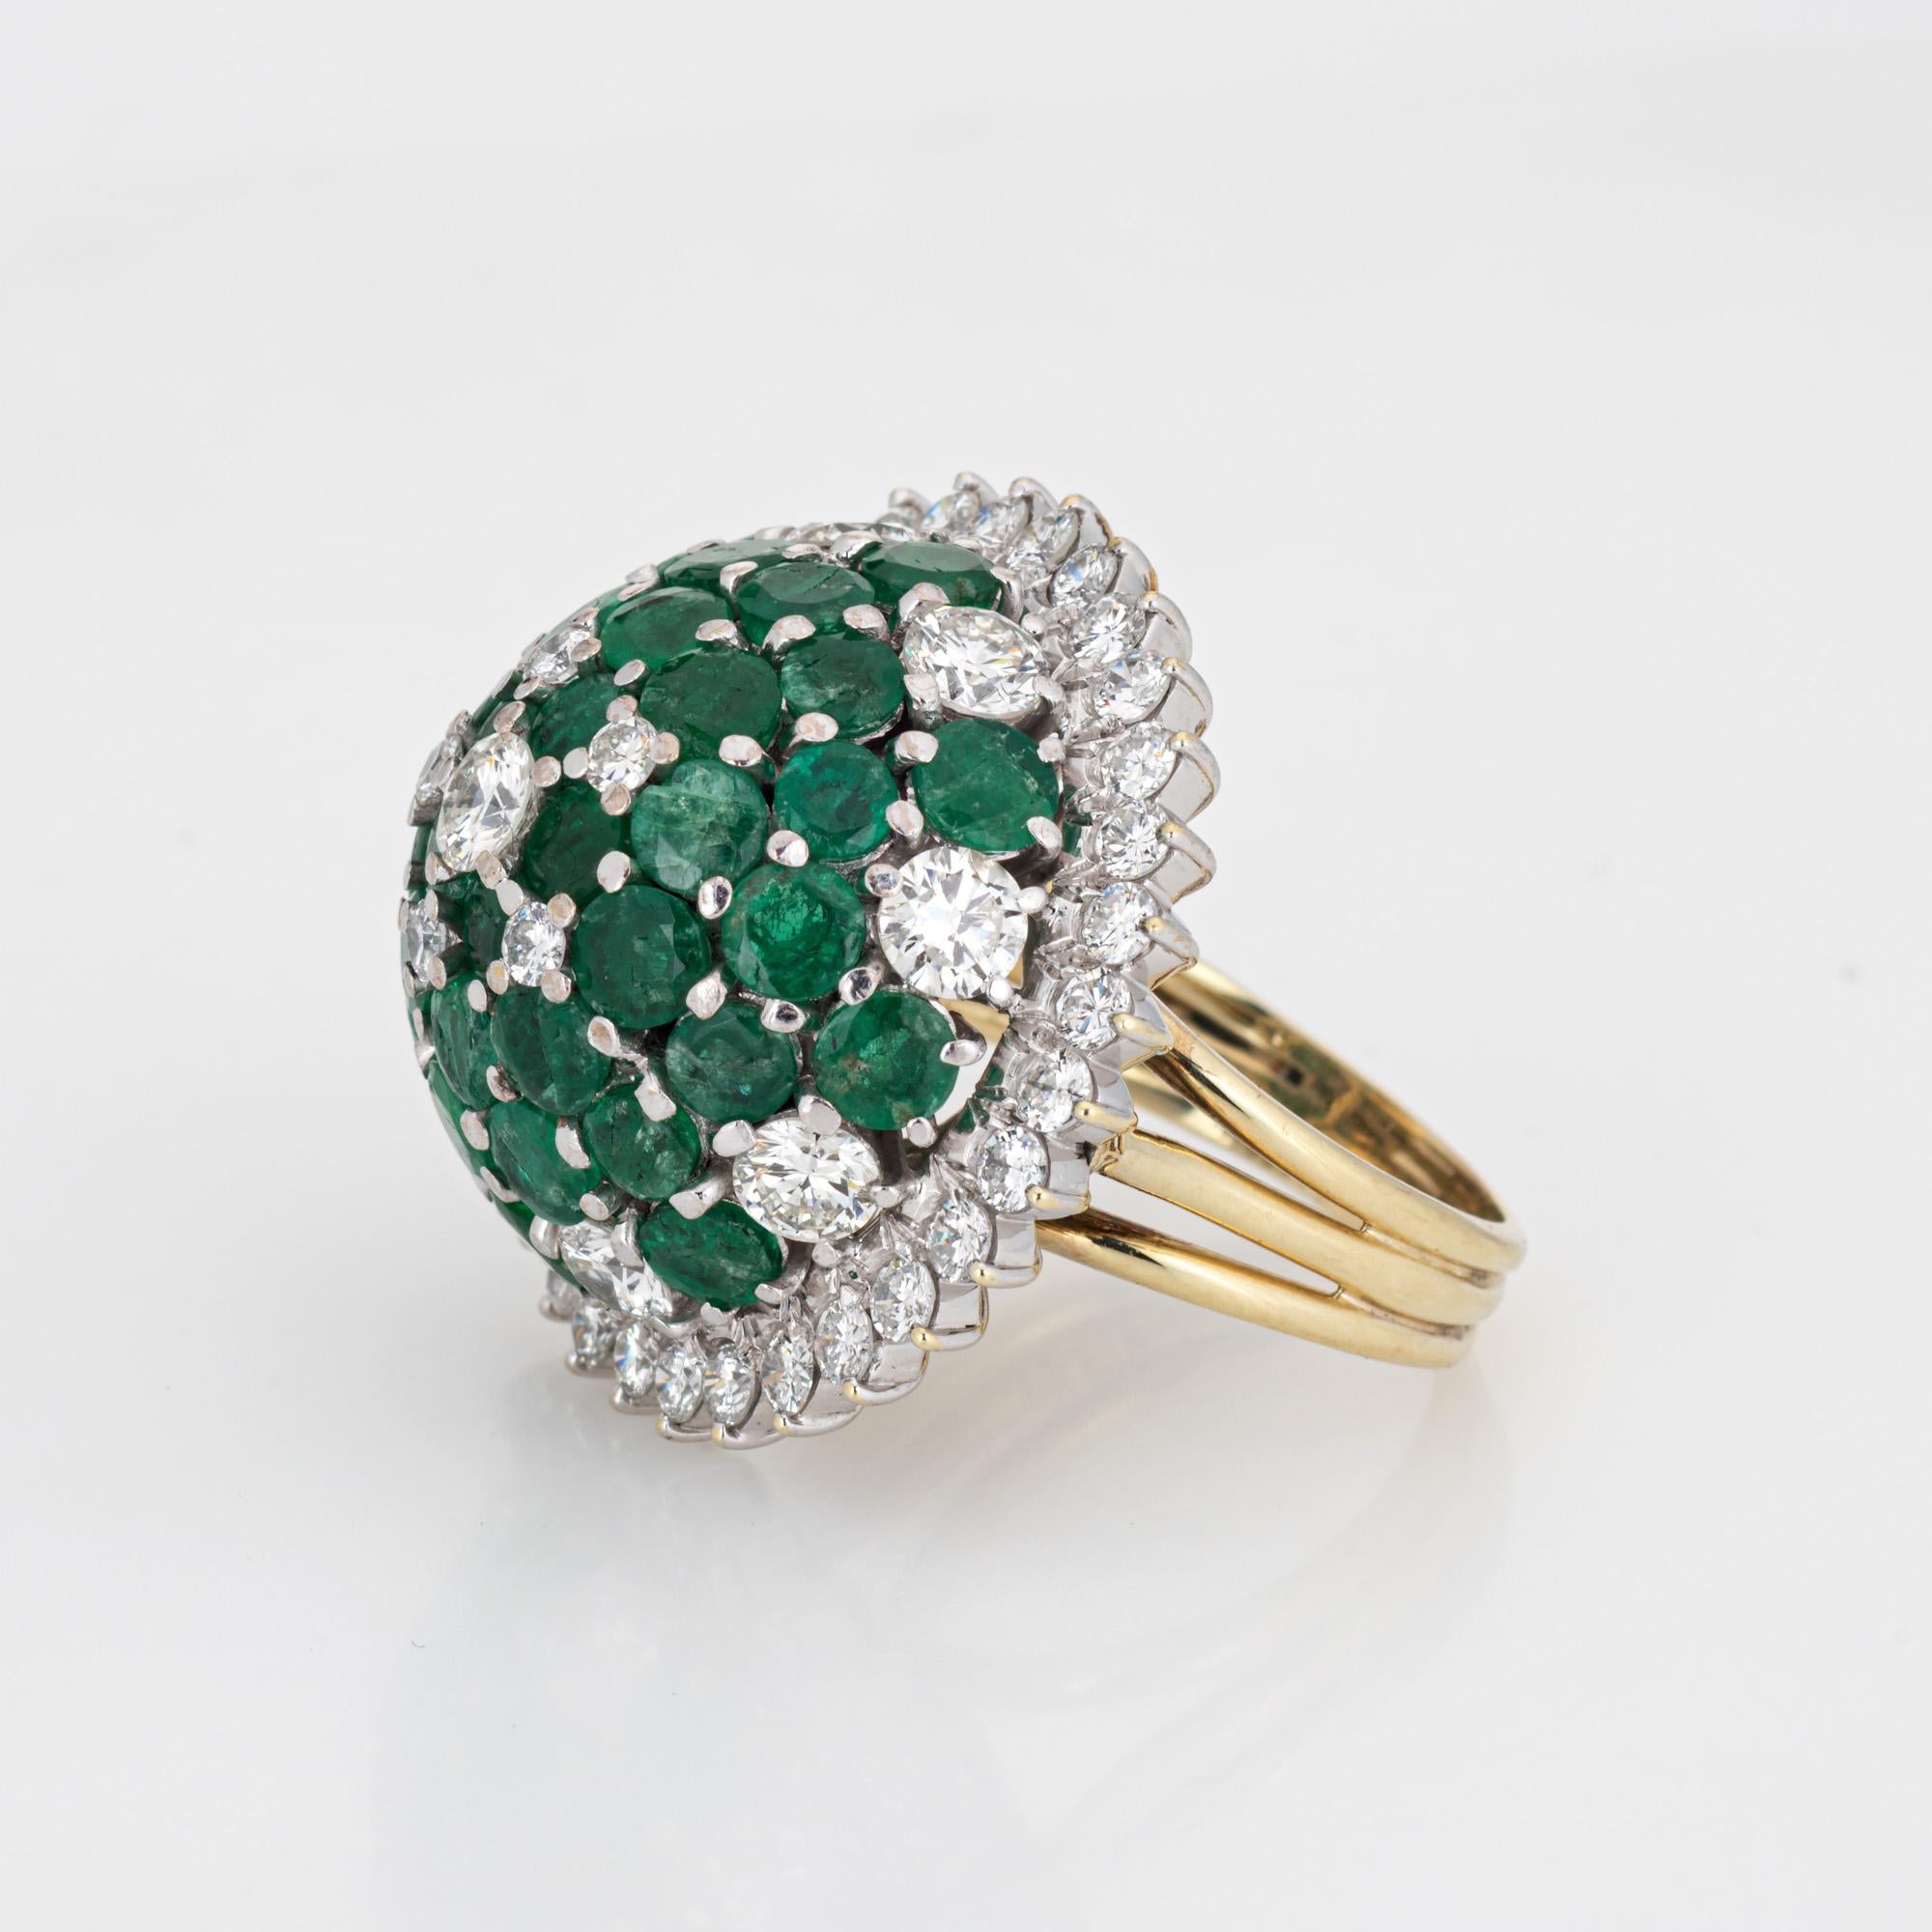 Taille ronde 2.50ct Diamond Emerald Dome Ring 60s Vintage 18k Gold Sz 6.75 Cocktail Jewelry en vente